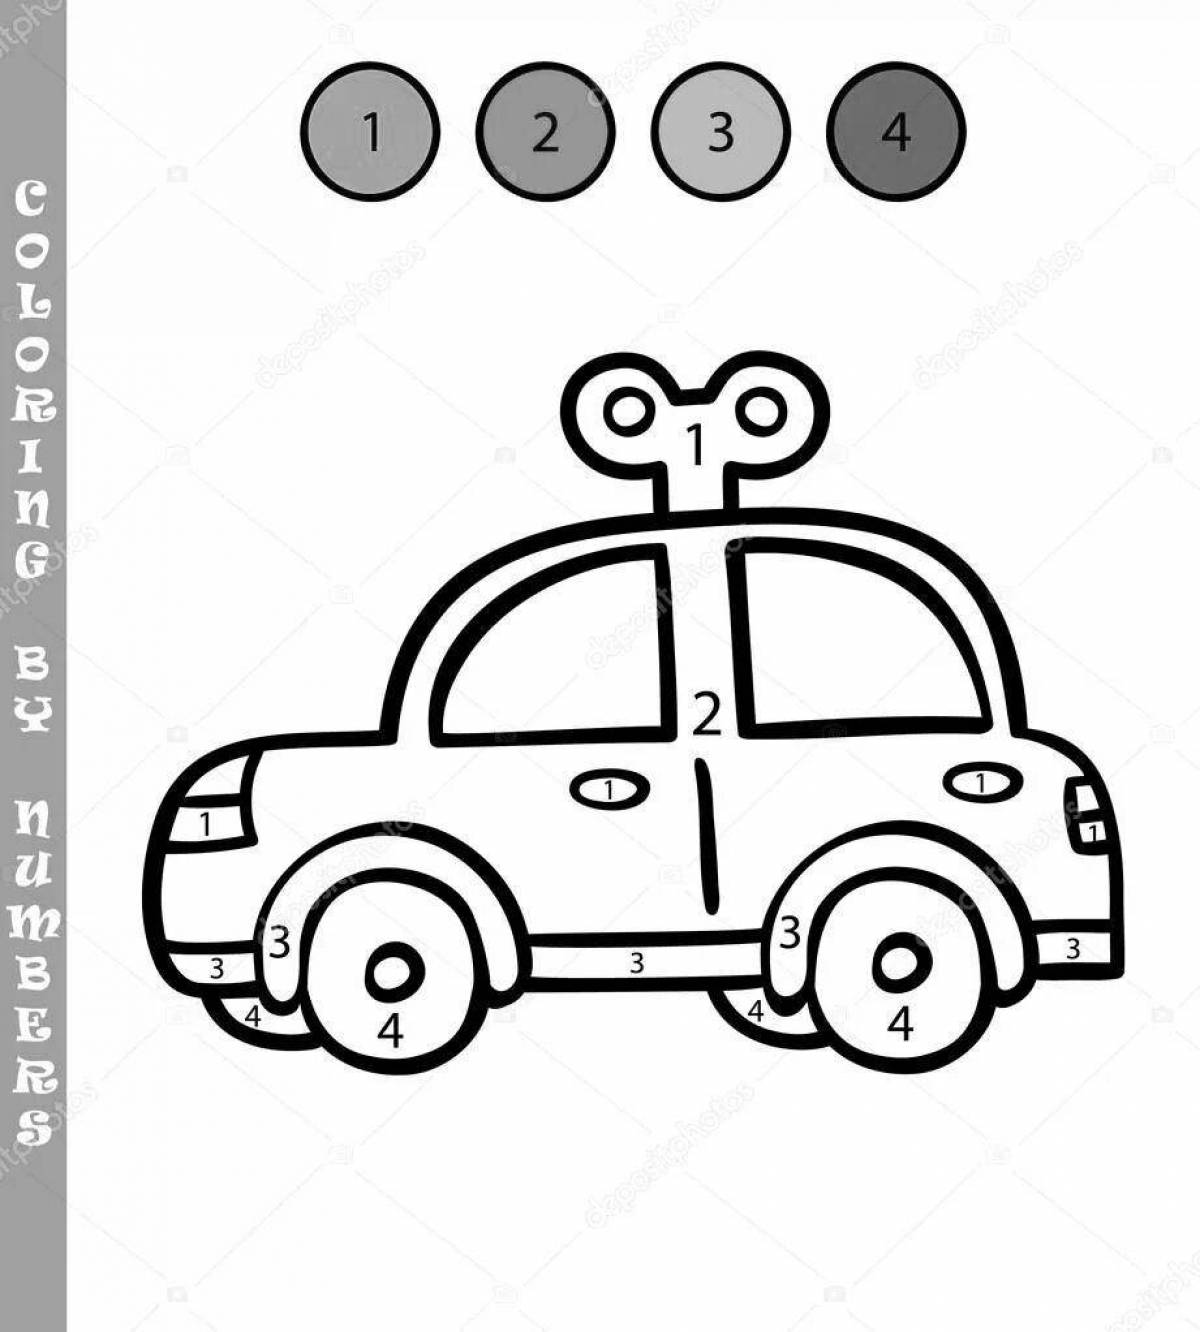 Amazing car number coloring page for 5-6 year olds